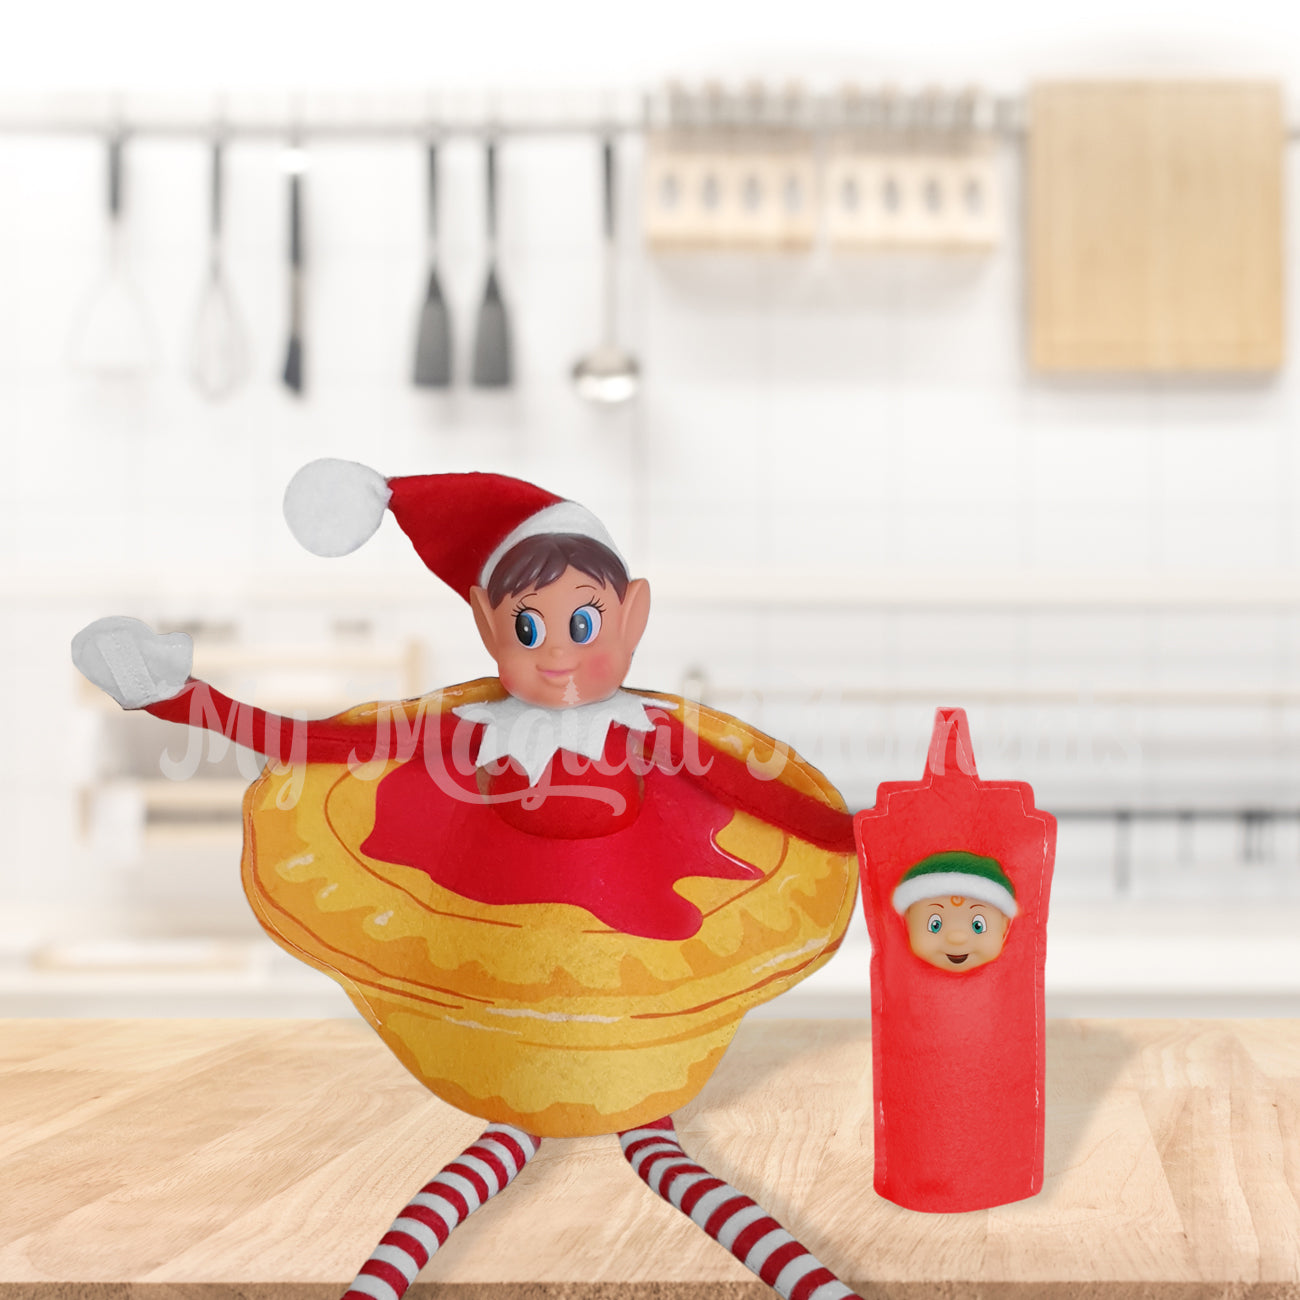 Elves behavin badly dressed as a pie with a elf toddler as tomato sauce